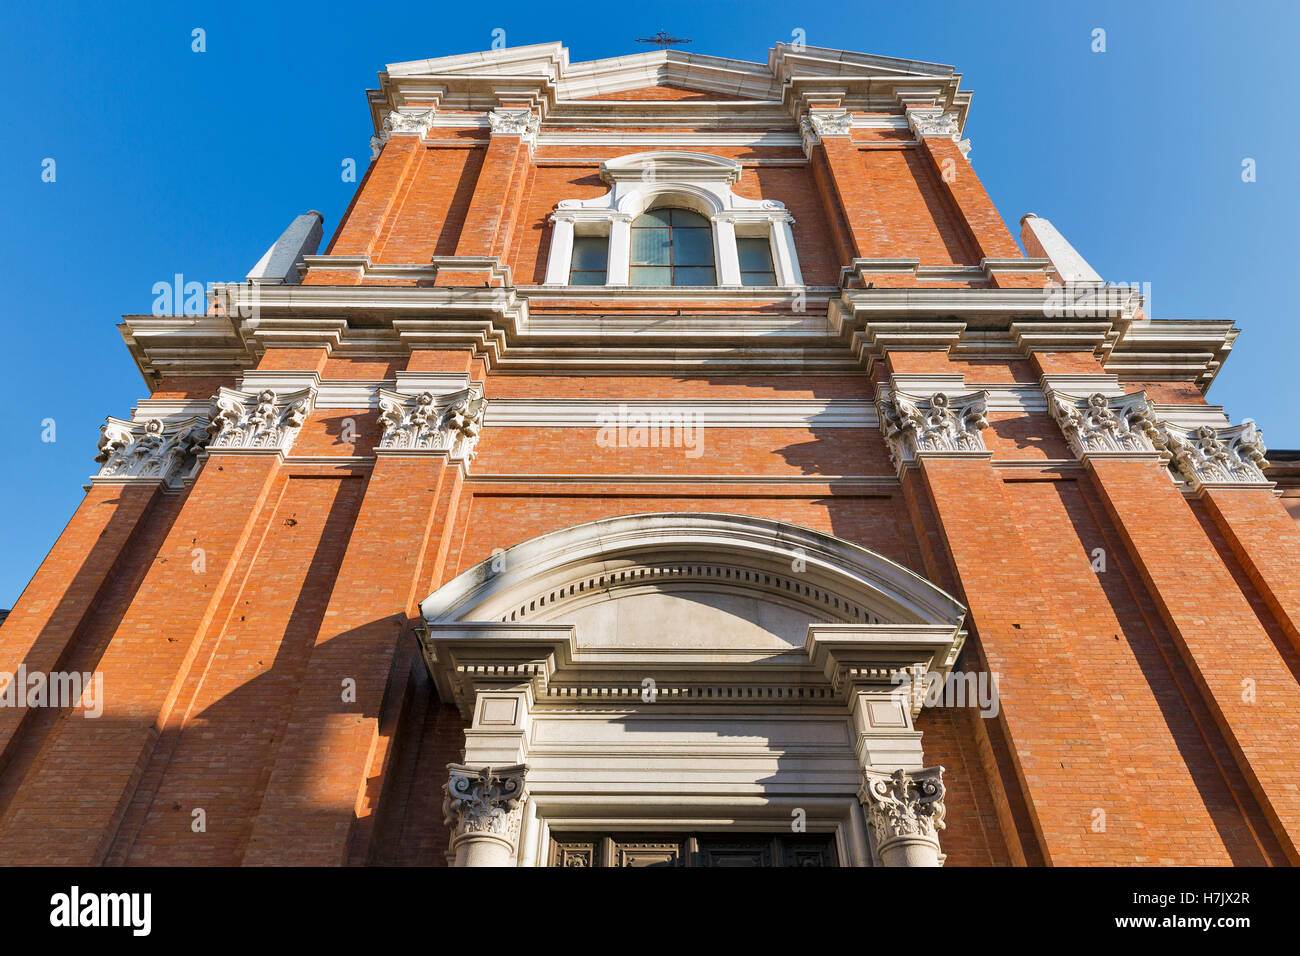 The Church of Servants also known as the Church of St. Mary in Court is a Baroque style Roman Catholic church in Rimini, Italy. Stock Photo